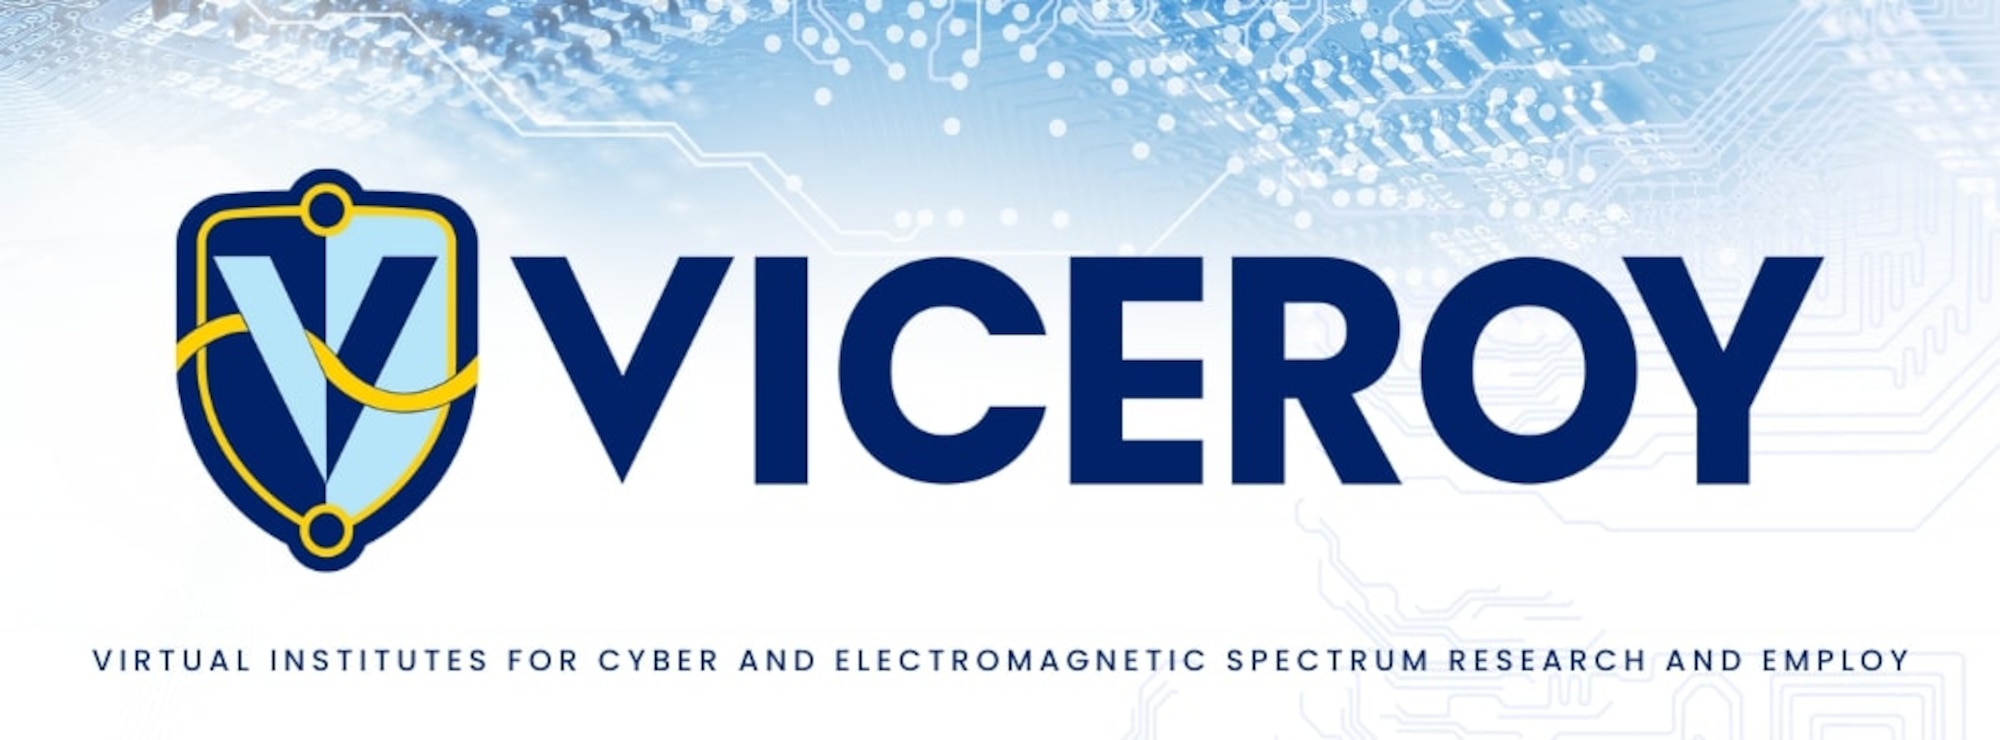 Official graphic for the The Virtual Institutes for Cyber and
Electromagnetic Spectrum Research and Employ (VICEROY) Program (Courtesy Graphic)